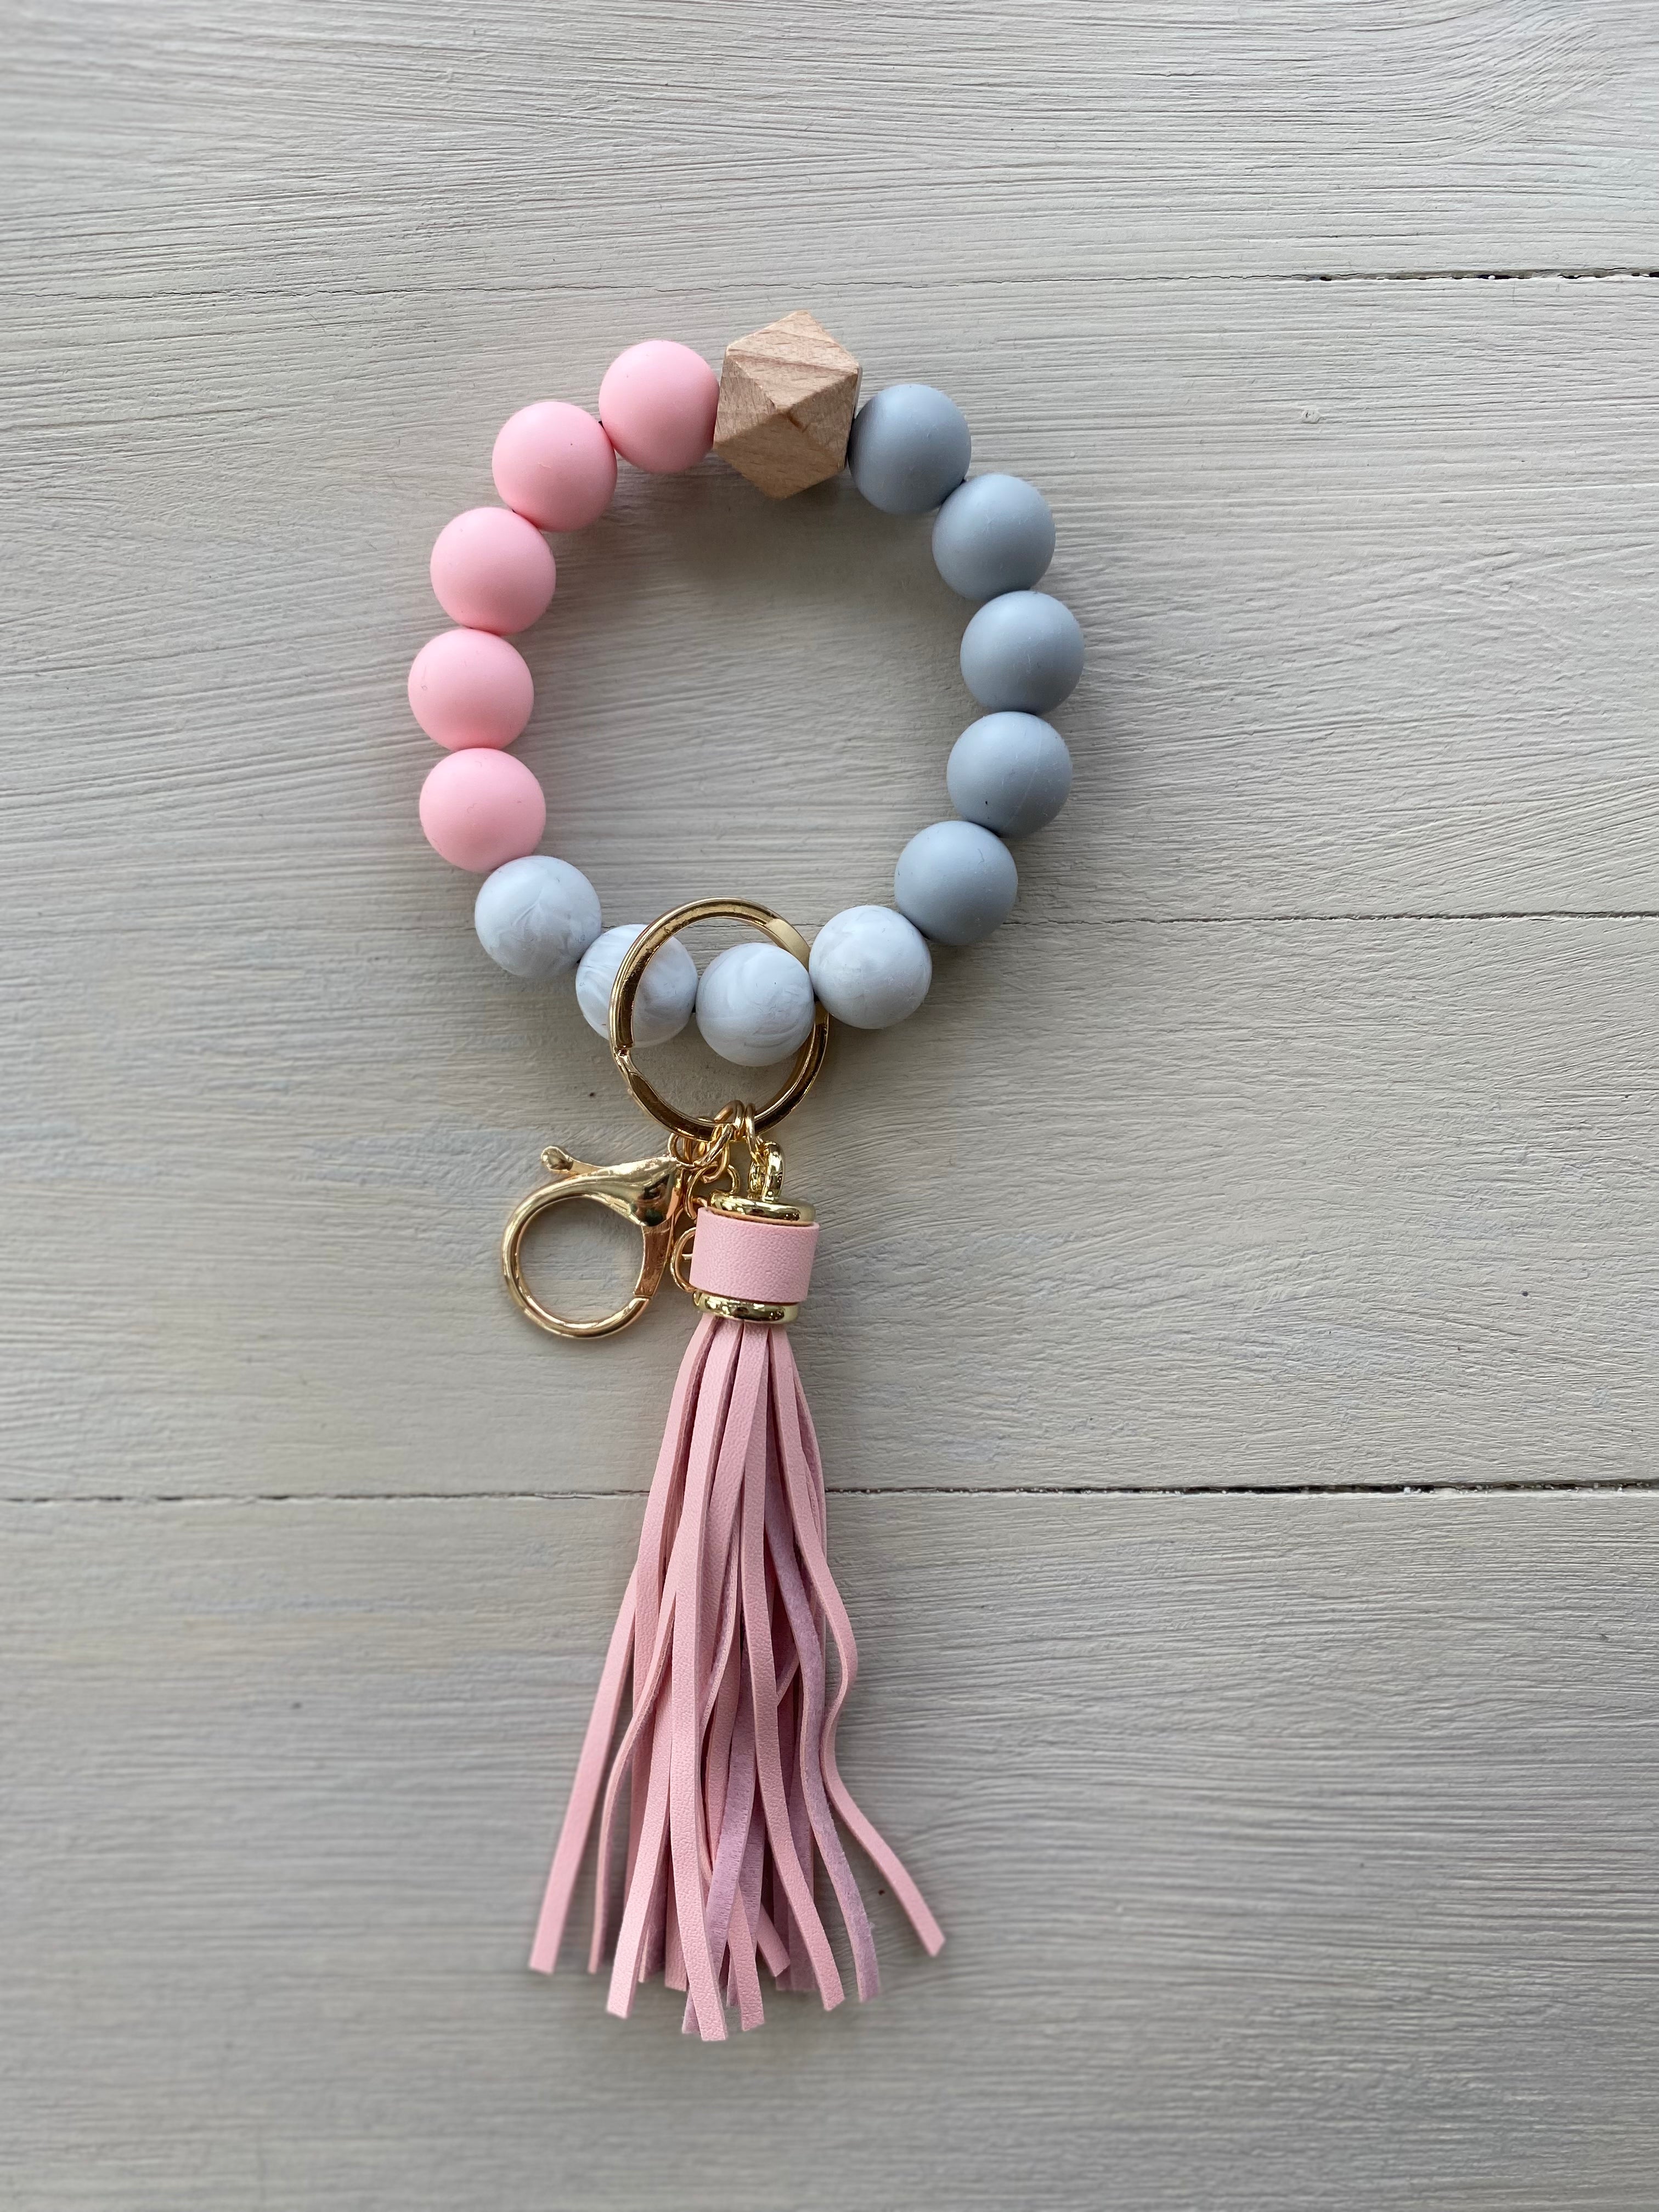 SVF Soft Pink and Grey Marble Silicone Wristlet Beaded Key Chain Bracelet with Tassel and Charm of choice! The Mustard Seed Collection, The Seed